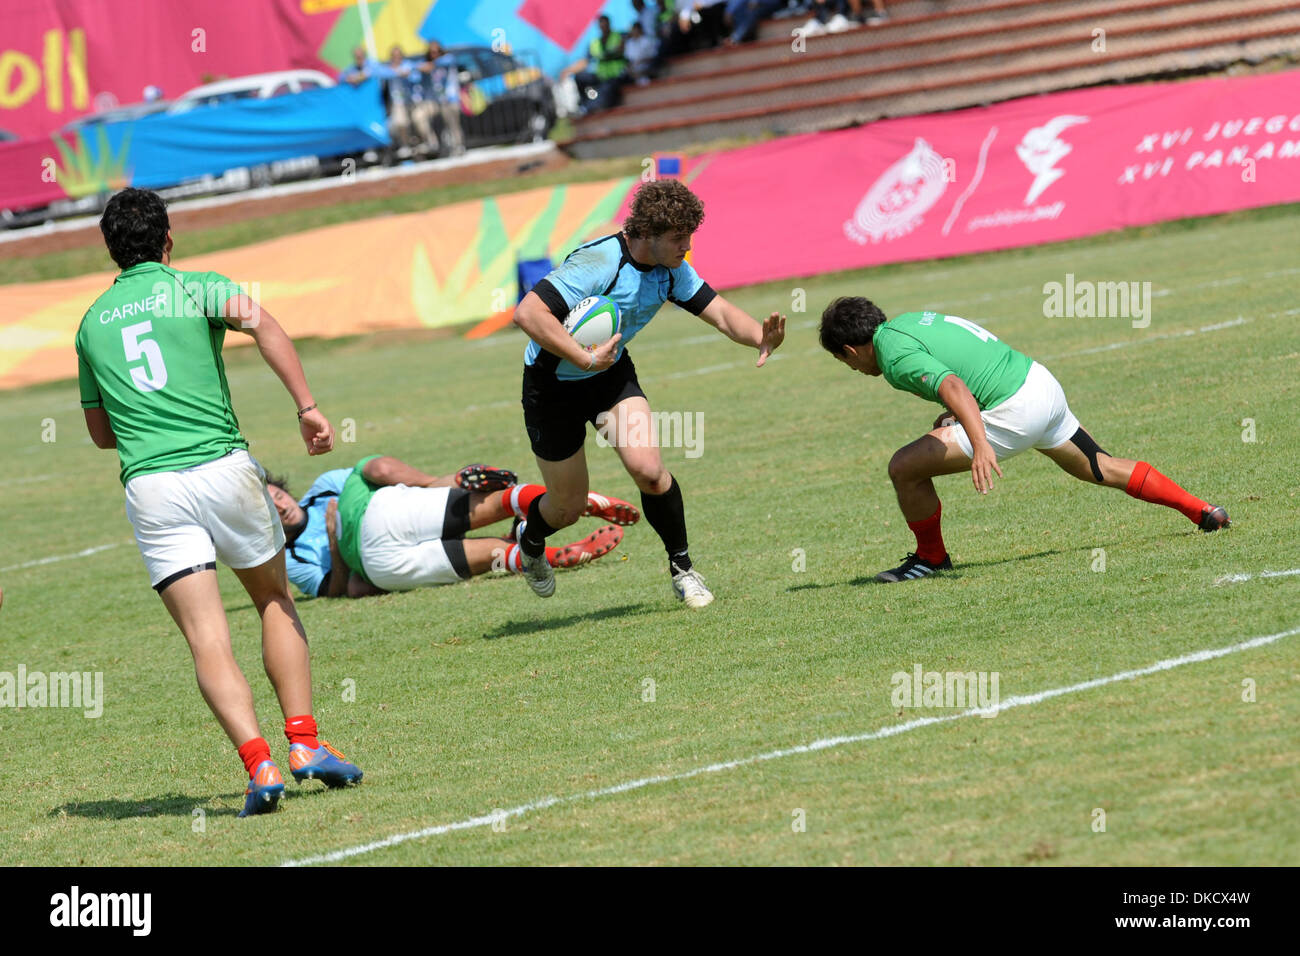 Oct. 29, 2011 - Guadalajara, Jalisco, Mexico - Mexico (green) and Uruguay (blue) face off as rugby sevens makes its debut at the Pan American Games with the first day of action. Uruguay won this match 22-0 (Credit Image: © Jeremy Breningstall/ZUMAPRESS.com) Stock Photo